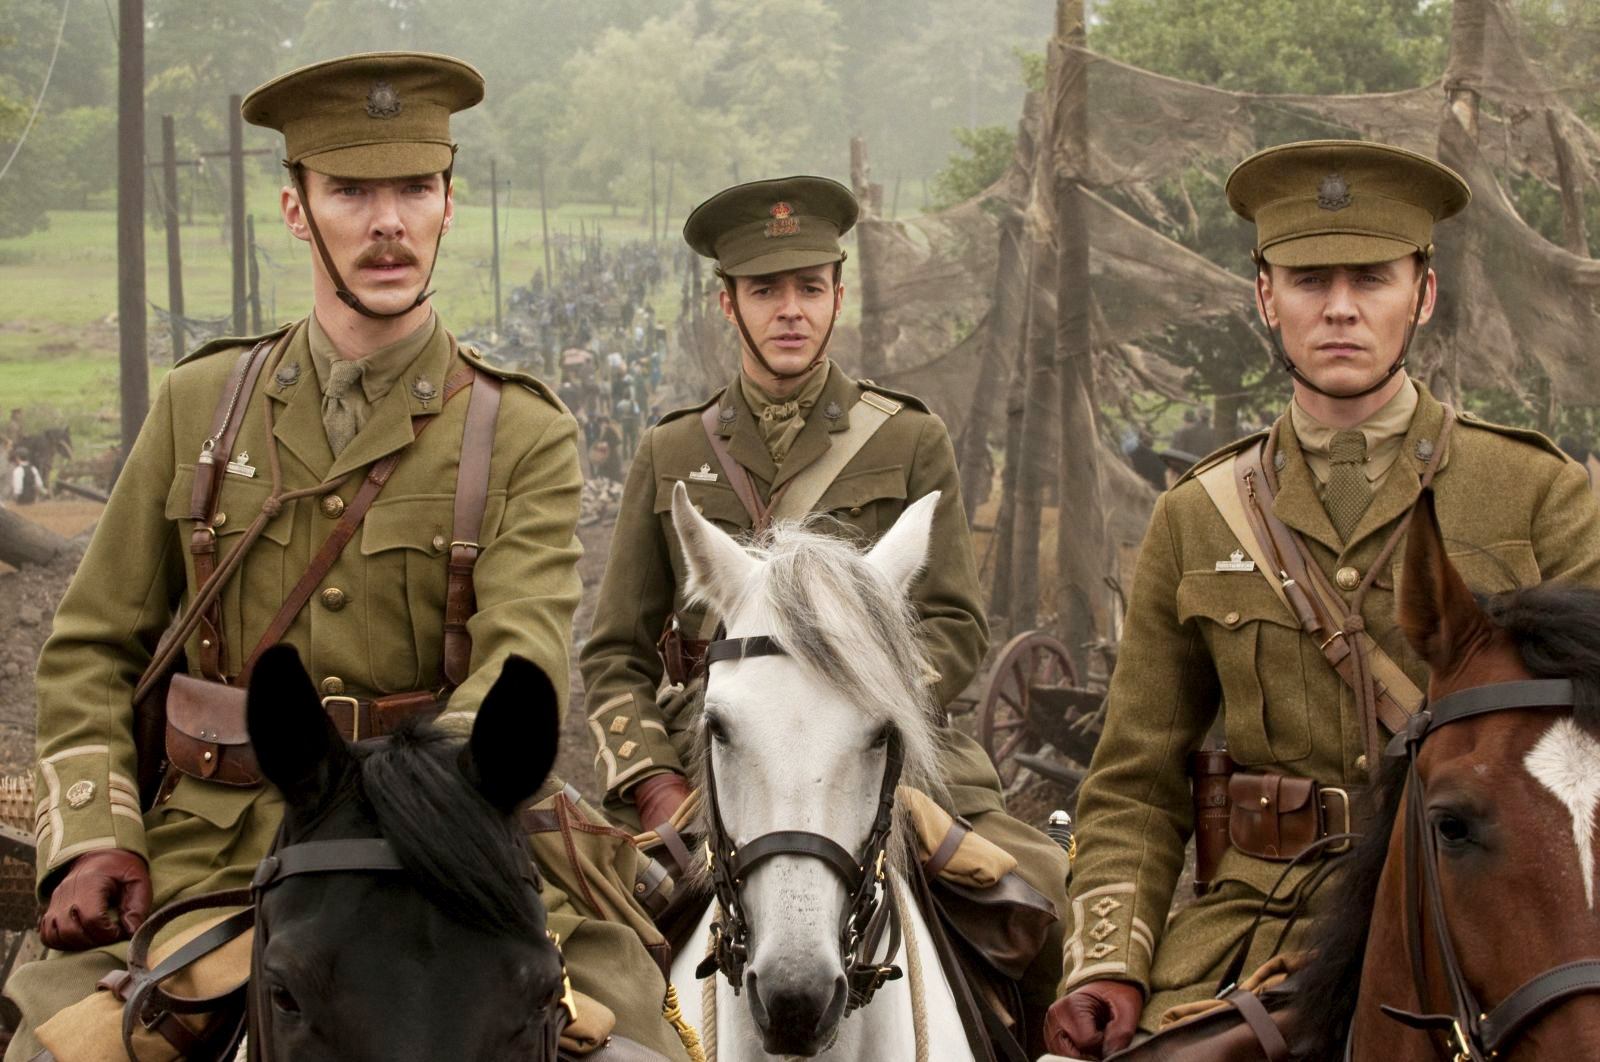 Benedict Cumberbatch, Patrick Kennedy and Tom Hiddleston in DreamWorks Pictures' War Horse (2011). Photo by: David Appleby.